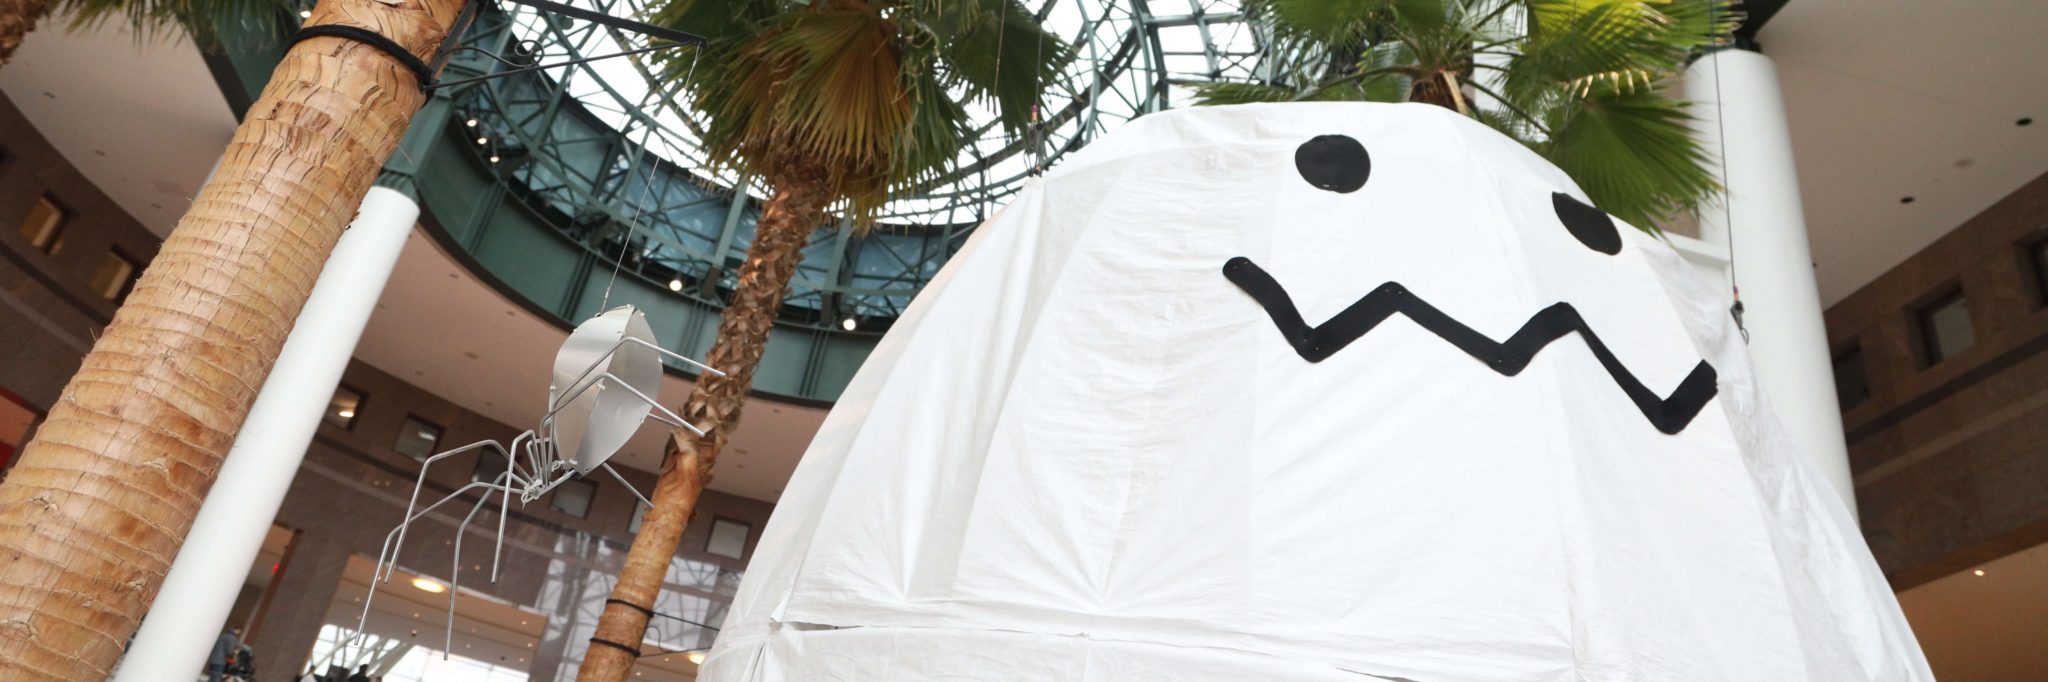 Ghost and Spider art installations in the Winter Garden Atrium for Halloween at brookfield place halloween bash